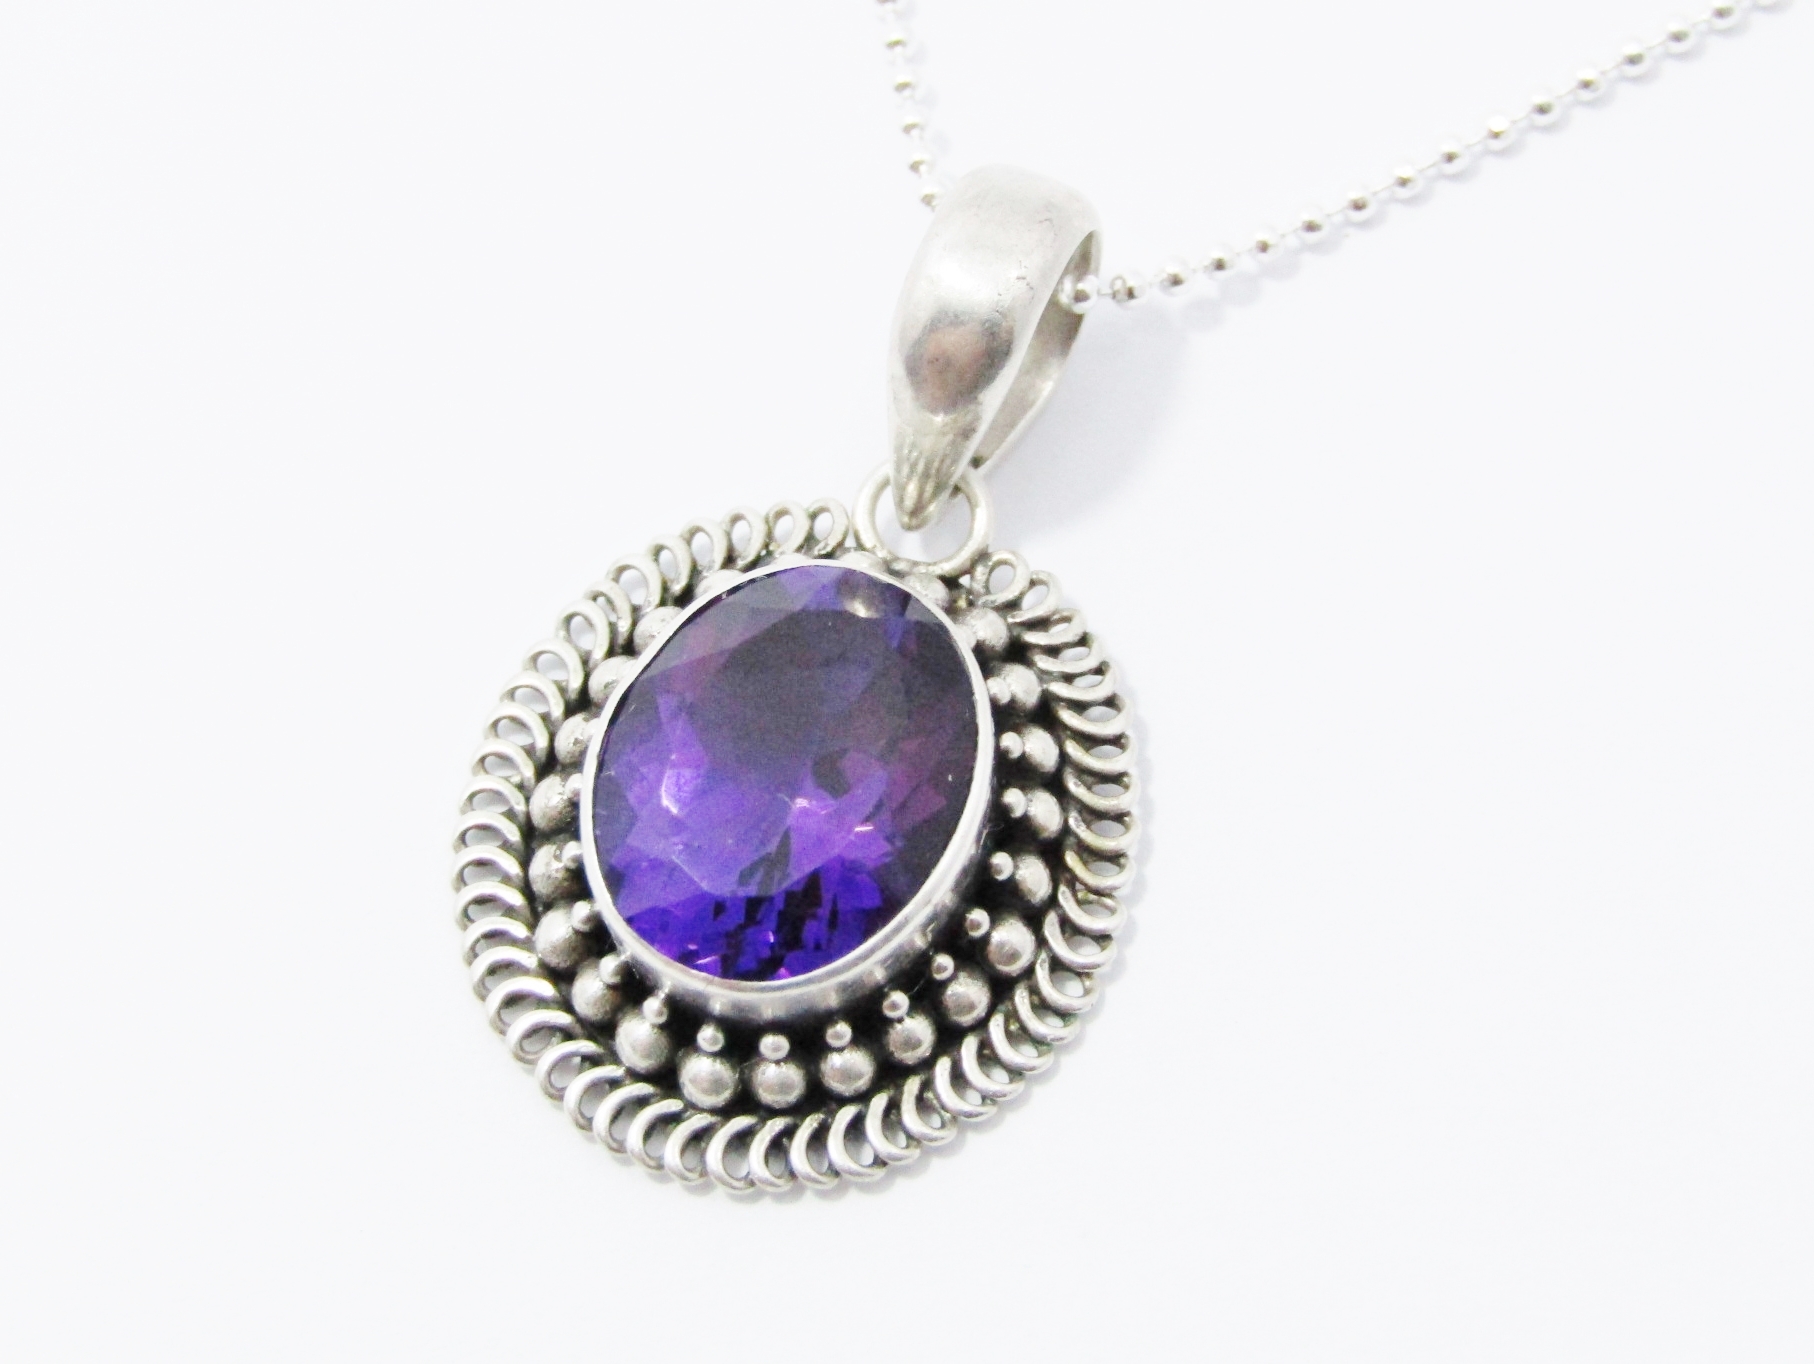 A Stunning Oval Amethyst Pendant On Chain in Sterling Silver.